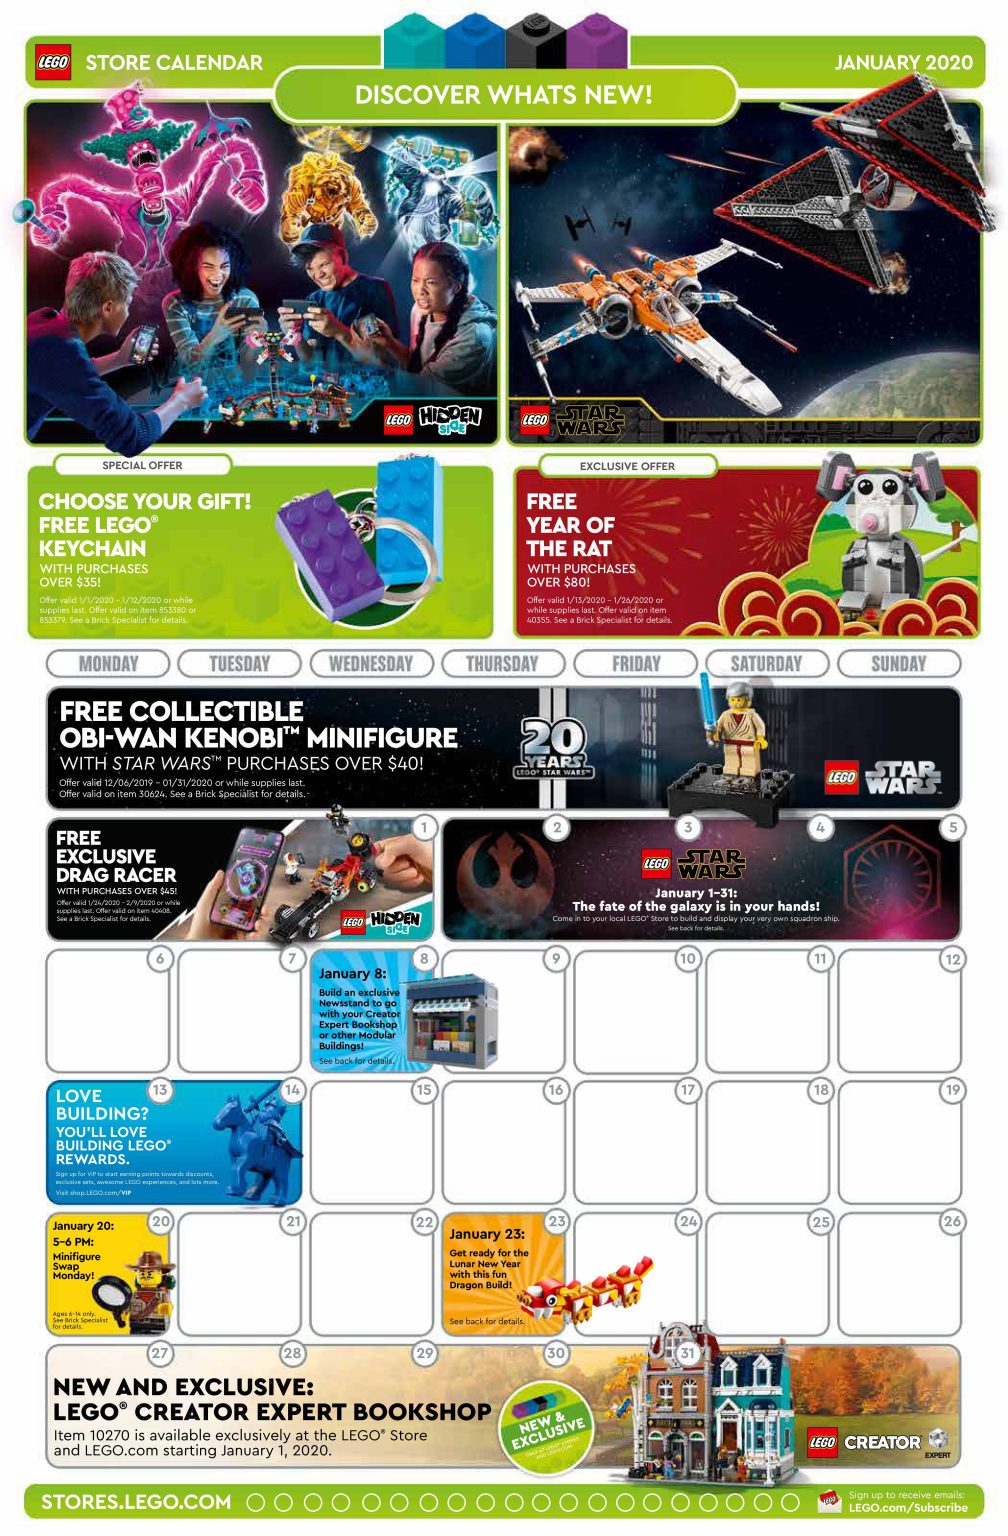 LEGO January 2020 Store Calendar Promotions & Events - The Brick Fan